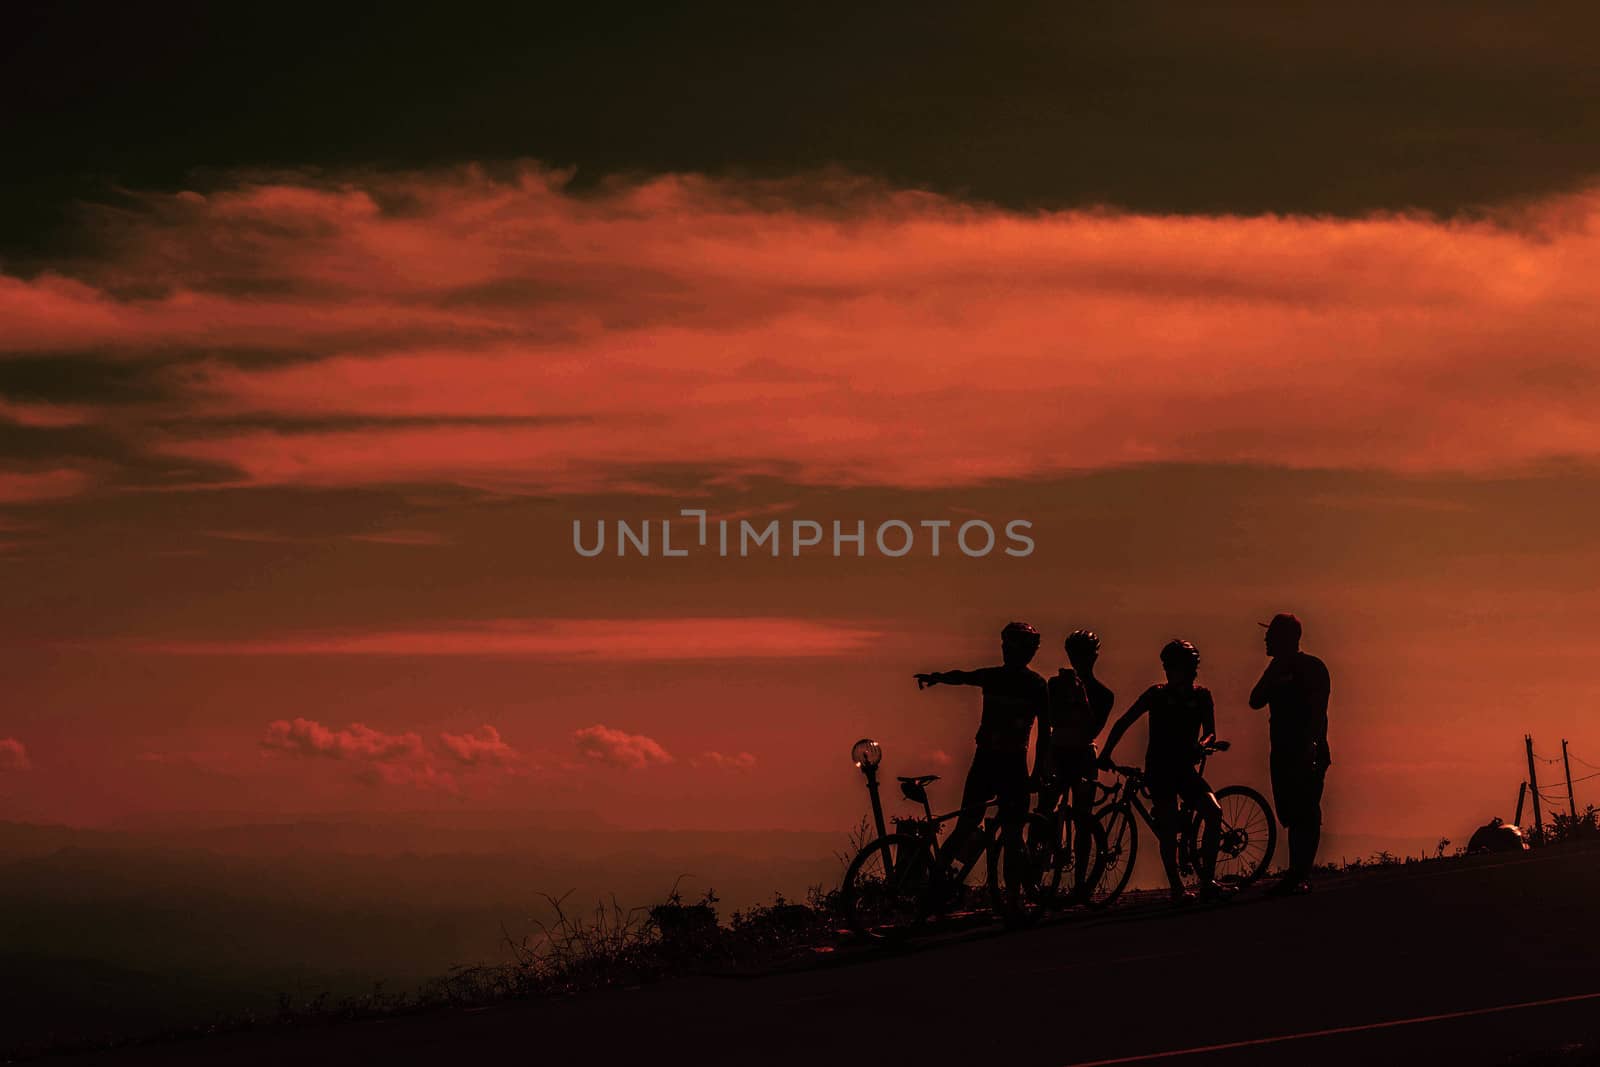 Cyclists group to view the sky at sunset.